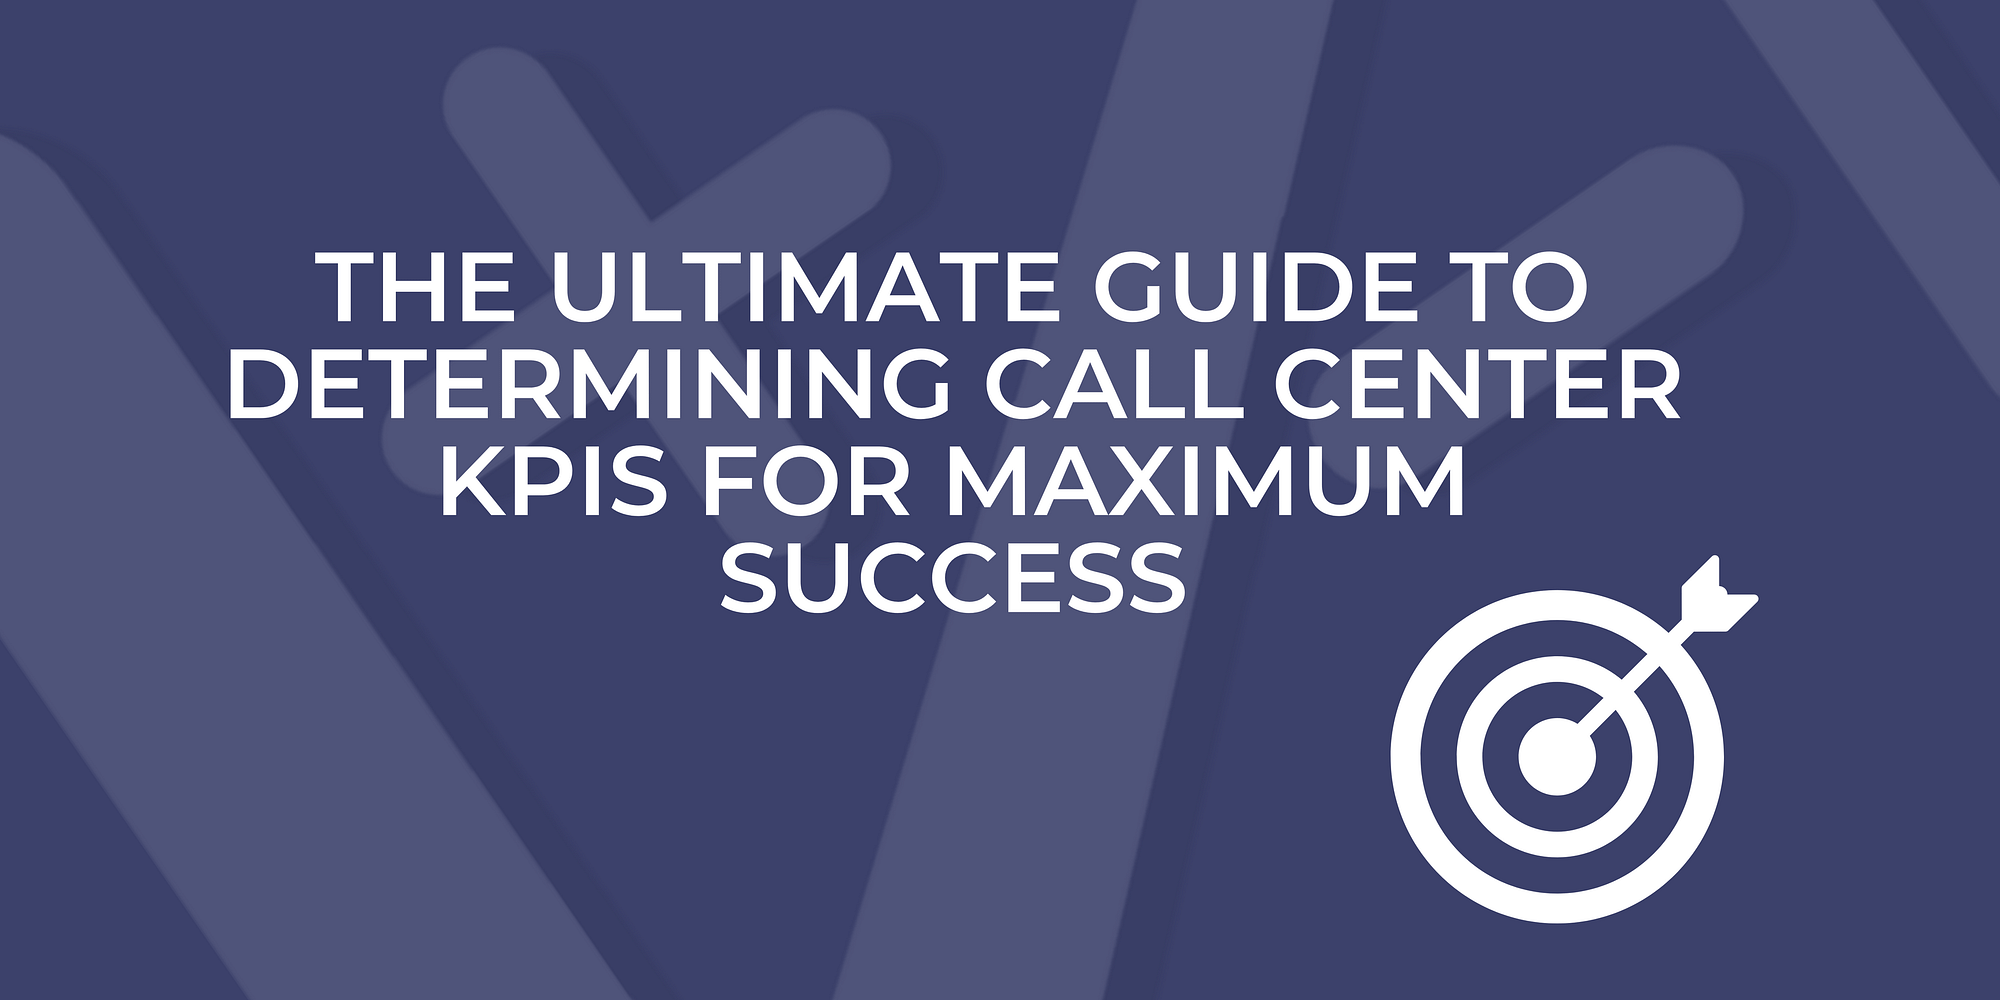 Ultimate Guide to Call Center KPIs